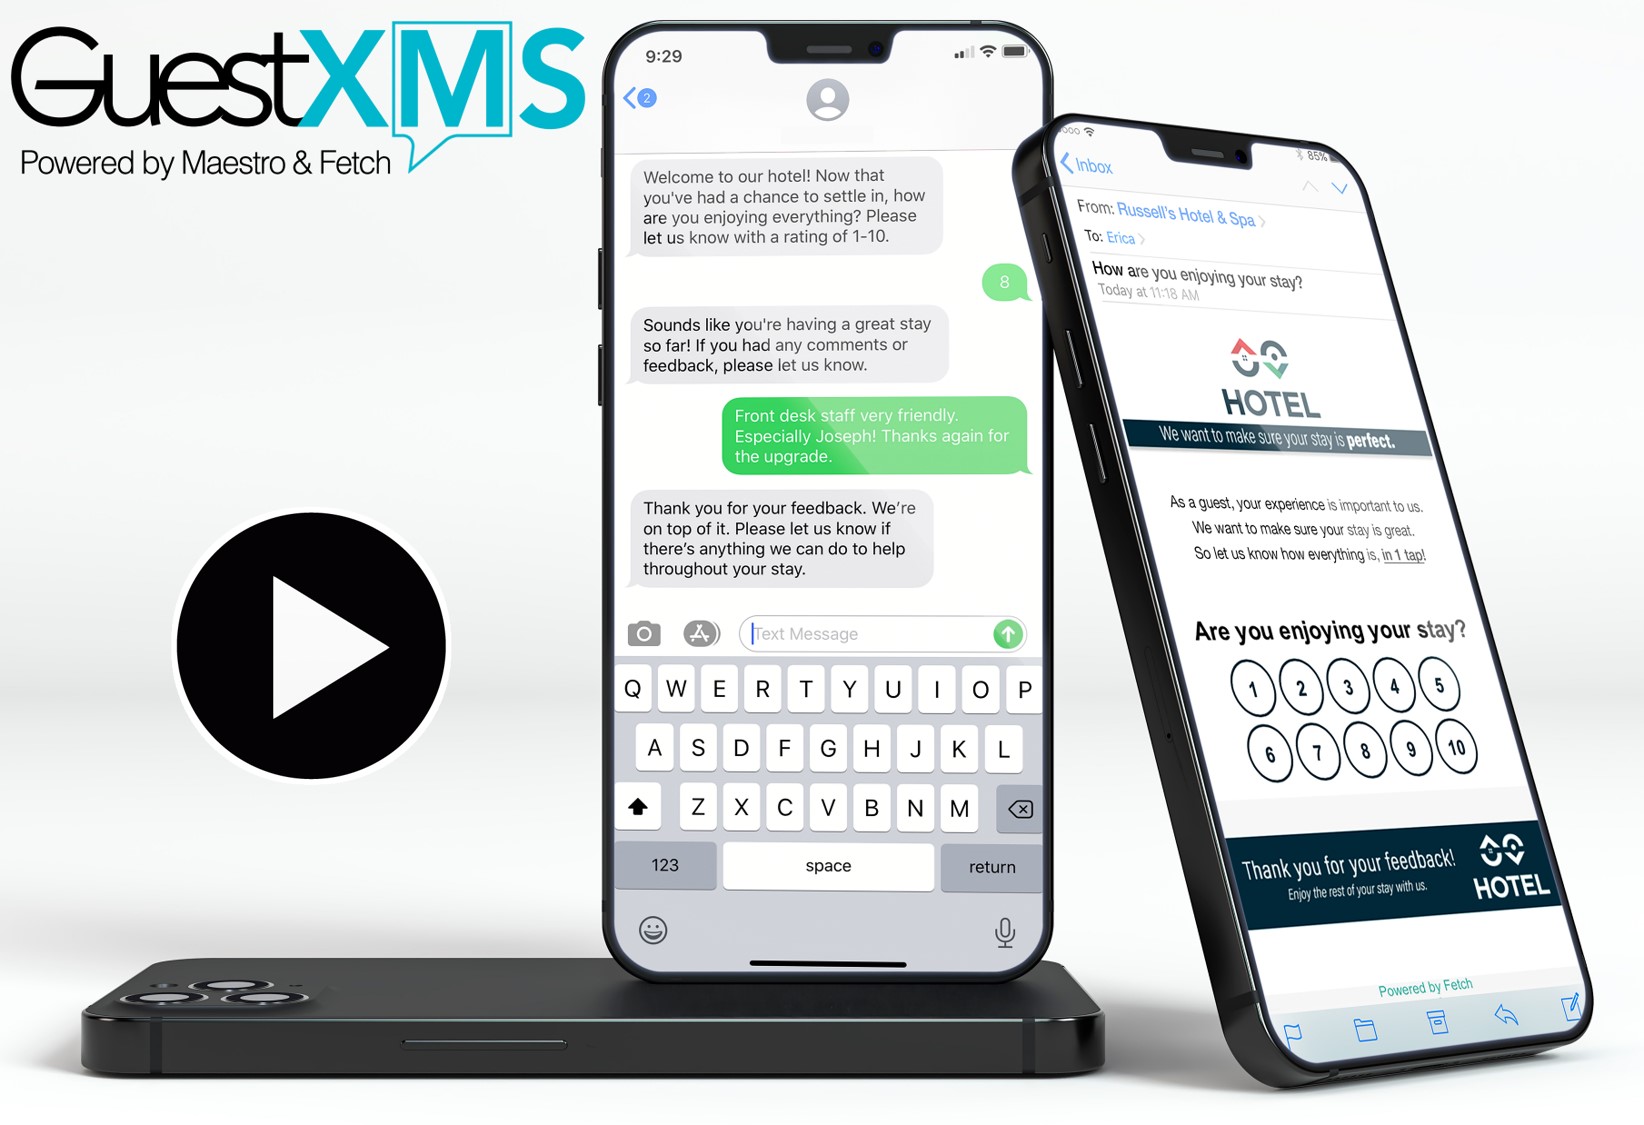 GuestXMS Main with Play Button 2 - Hoteliers Excited About Improved Guest Satisfaction with Maestro’s New GuestXMS Mobile Engagement & Feedback Tool - Innovative Property Management Software Solutions Powering Hotels, Resorts & Multi‑Property Groups.